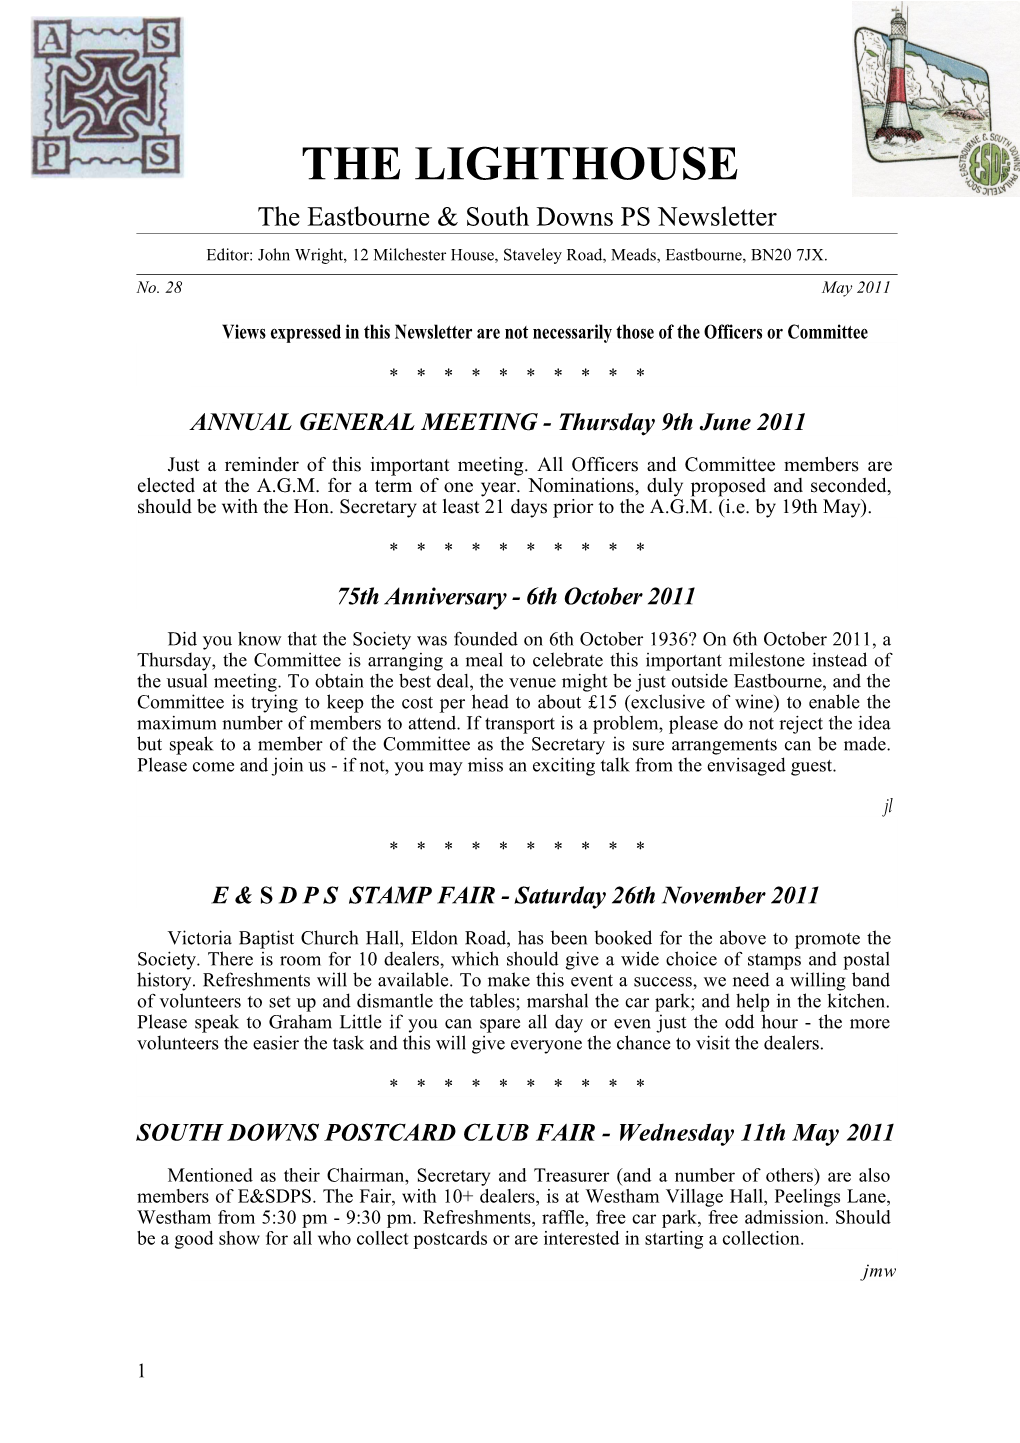 The Eastbourne & South Downs Psnewsletter